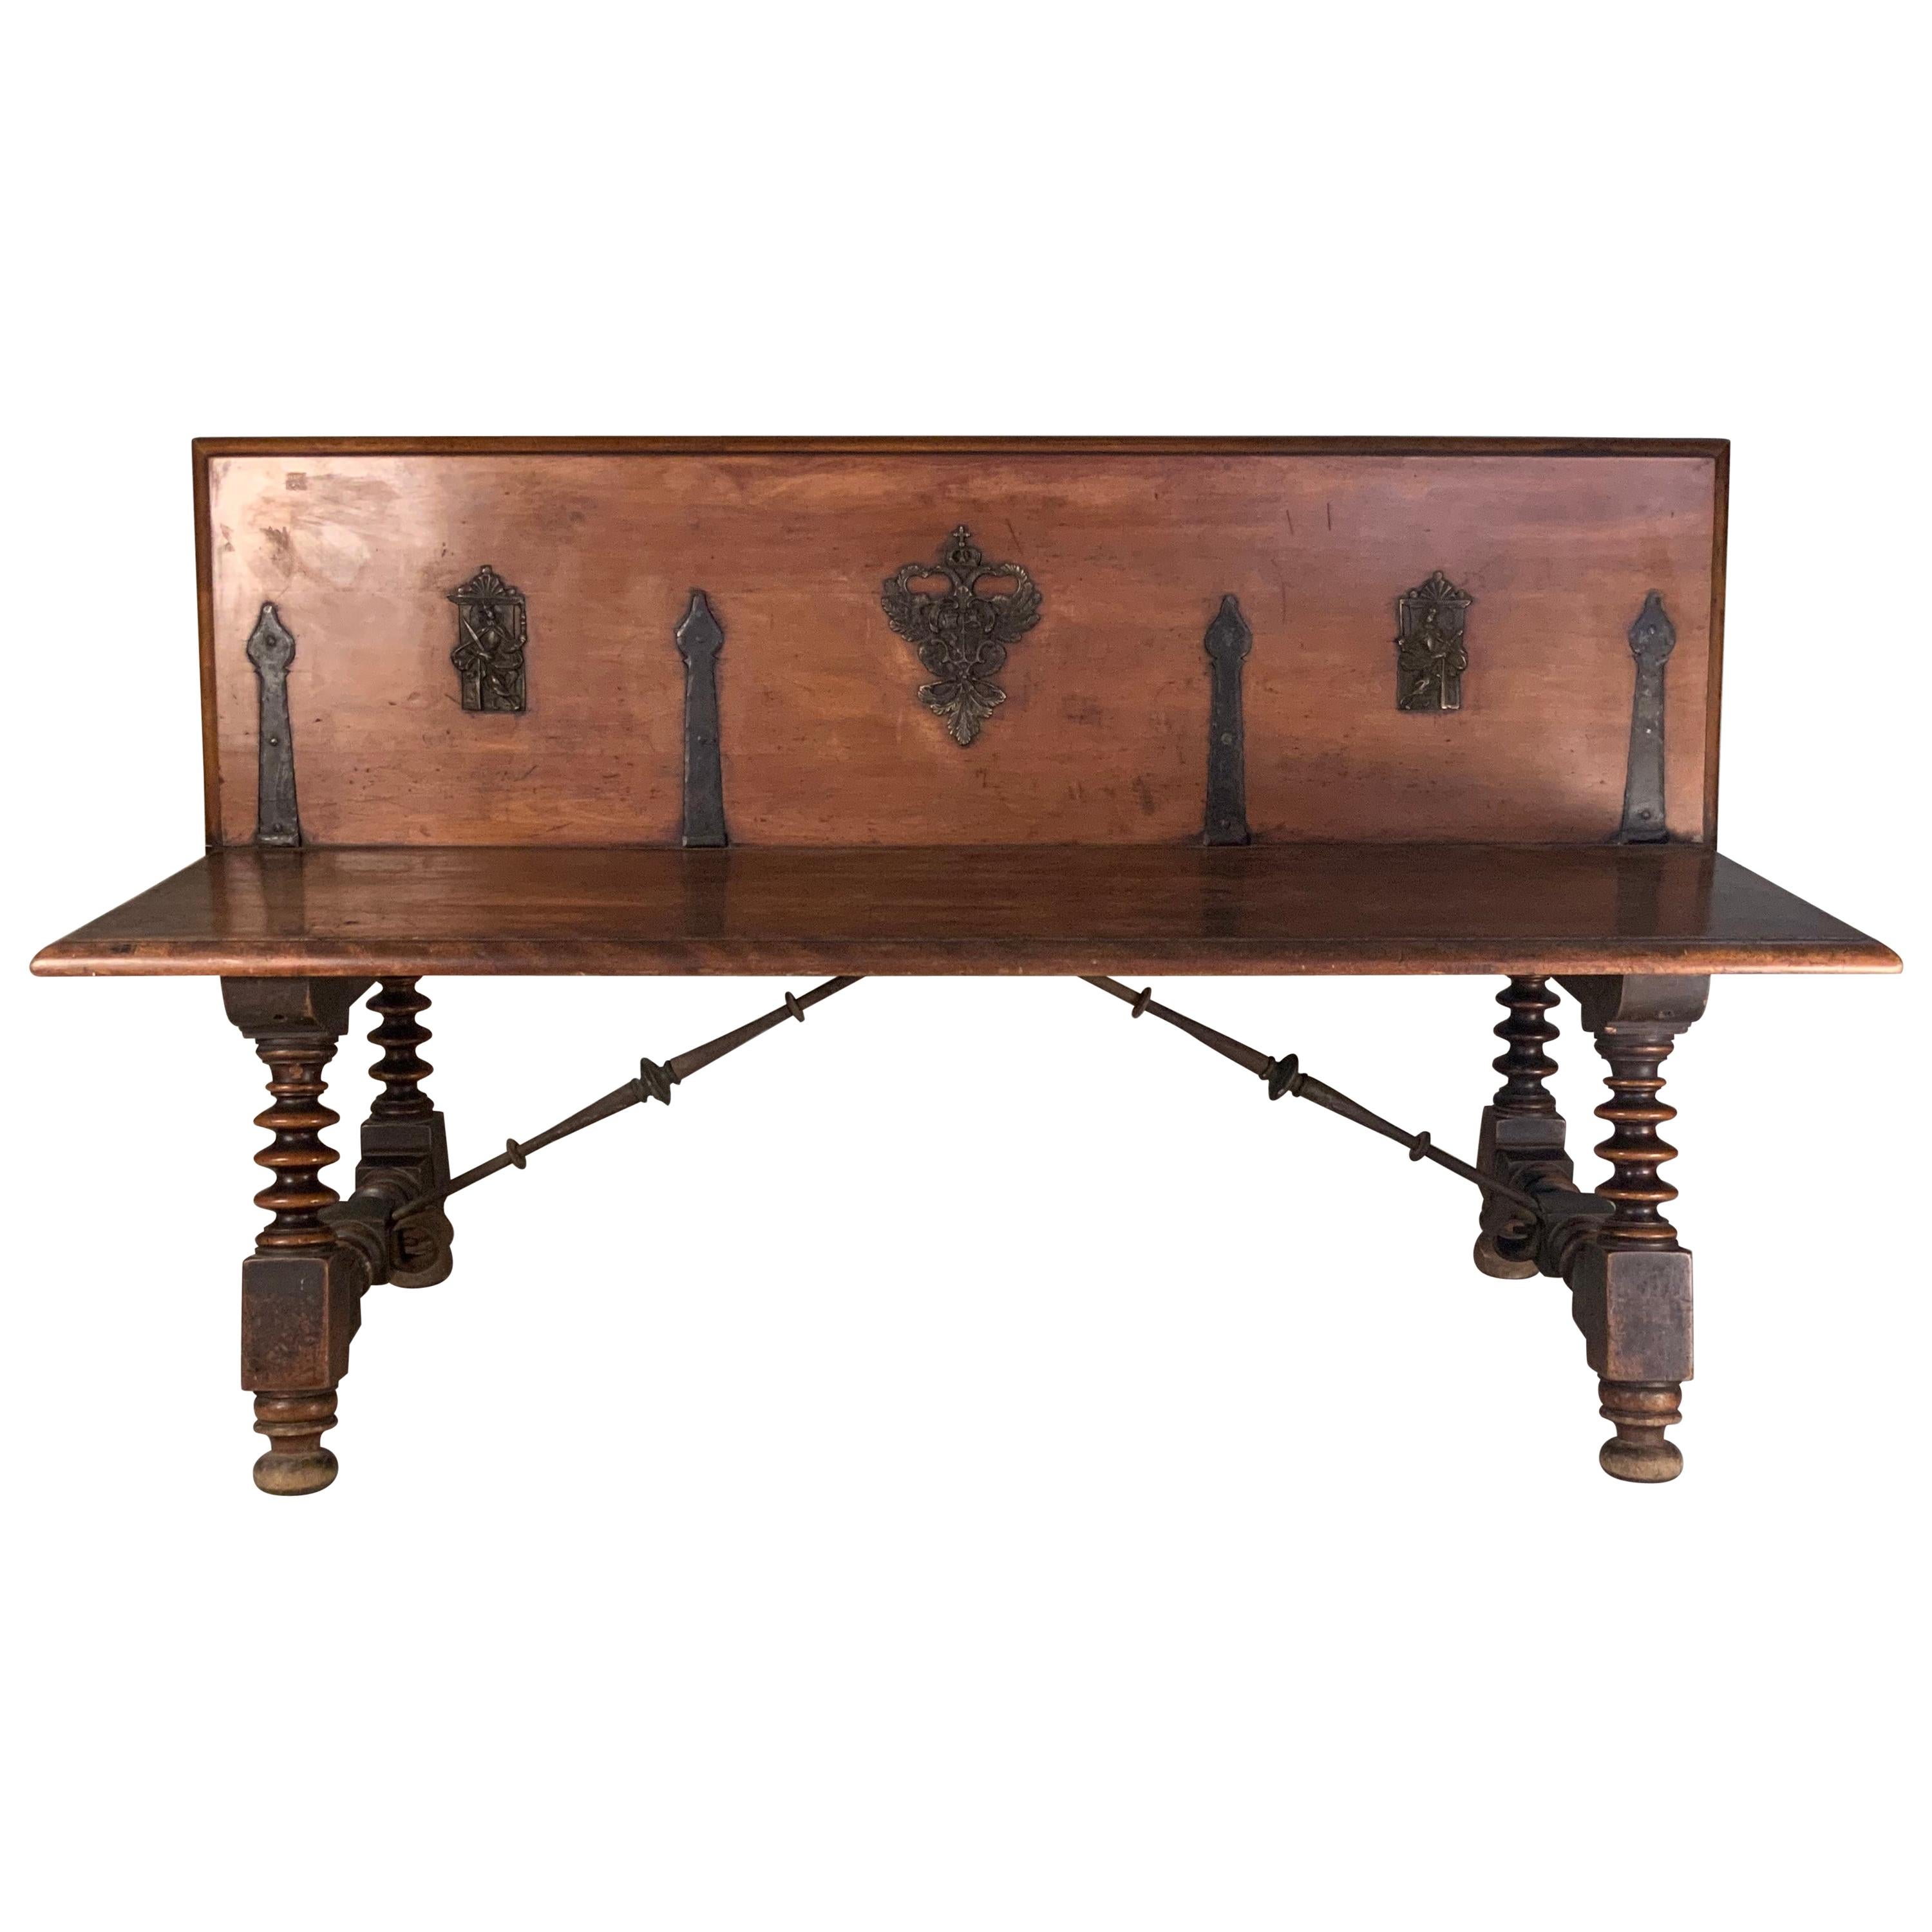 Antique 19th Century Italian Walnut Bench with Spindle Leg and Iron Base